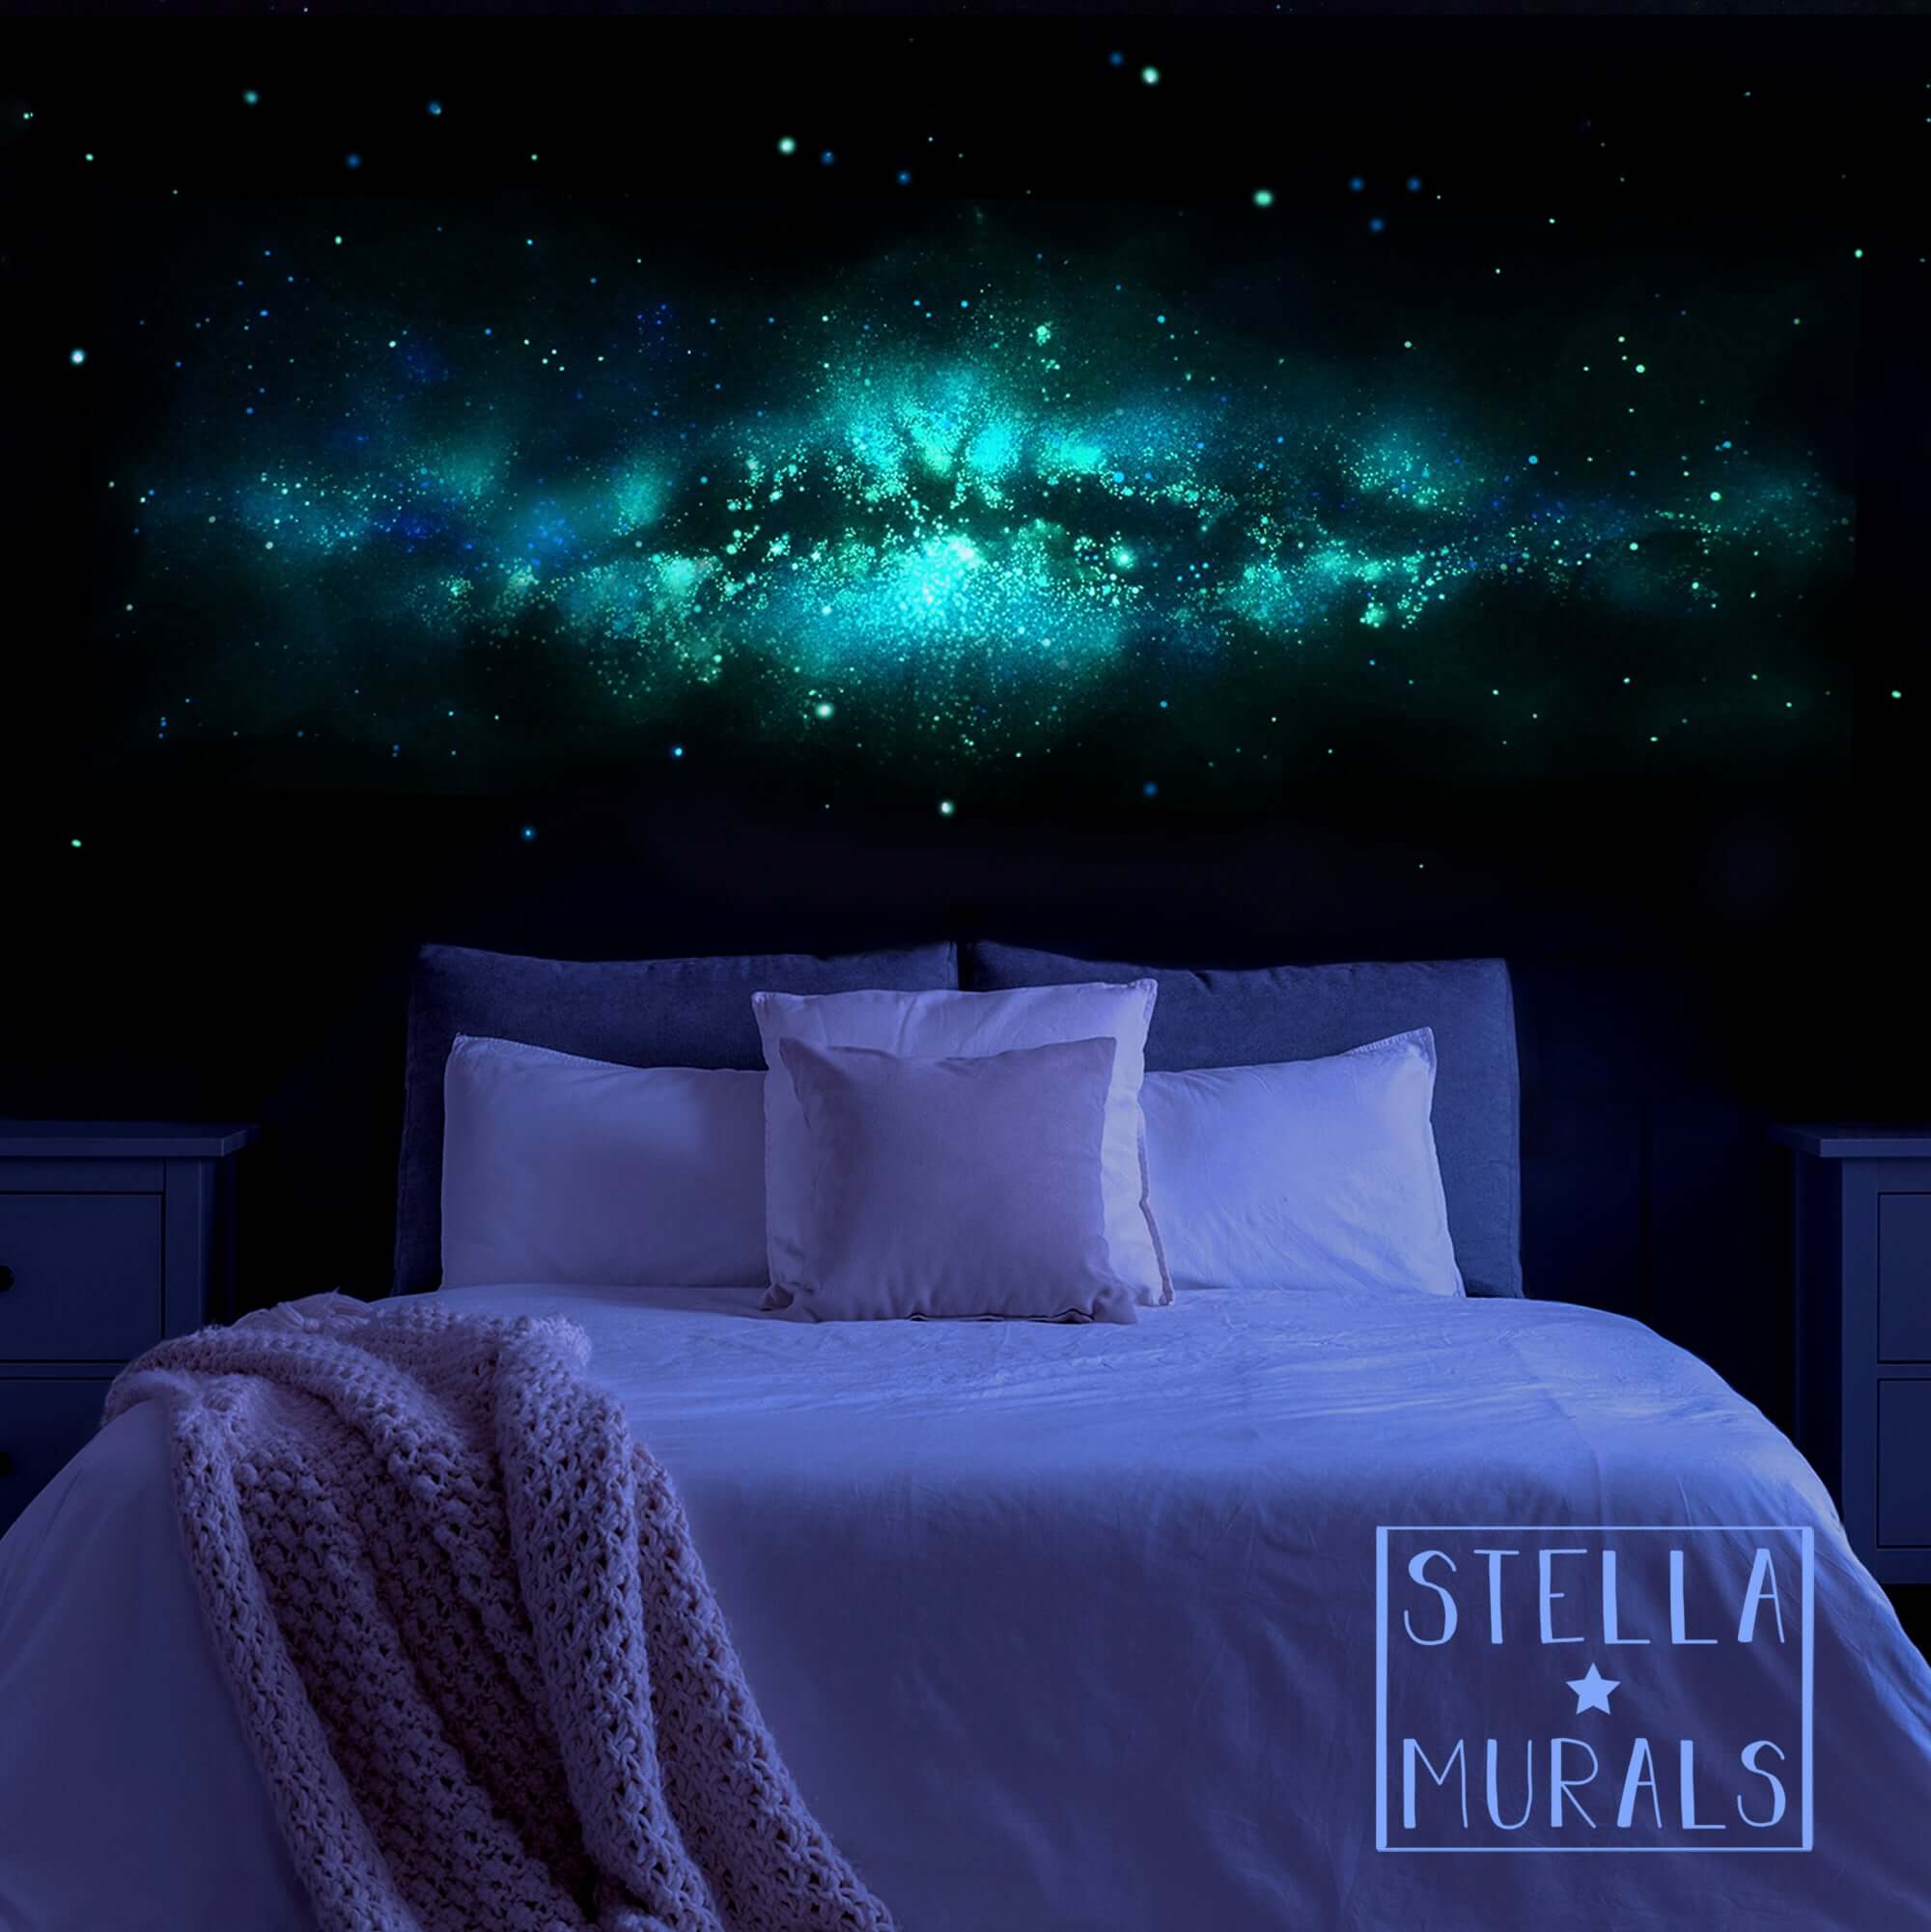 Glow in the Dark Stars, Space Themed Decor, Ceiling Stars, Wall Stickers  Kids, Galaxy Bedroom Decor, Wall Stickers Bedroom, Space Wall Decal 